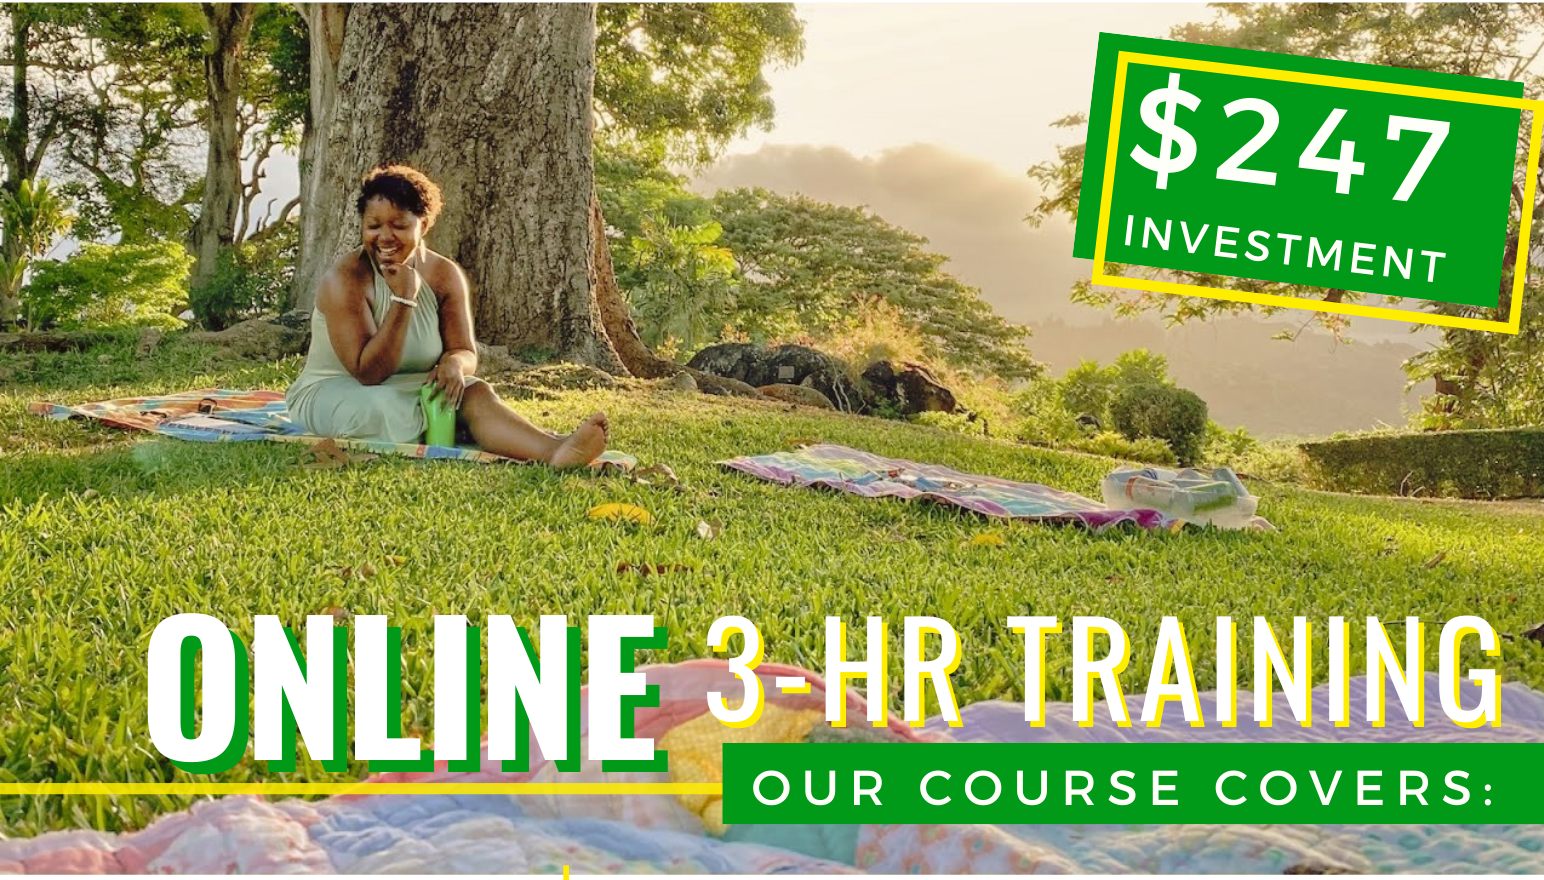 ONLINE Retreat Planning Course with Coach D Nicole of Sh&#39;Shares NETWORK